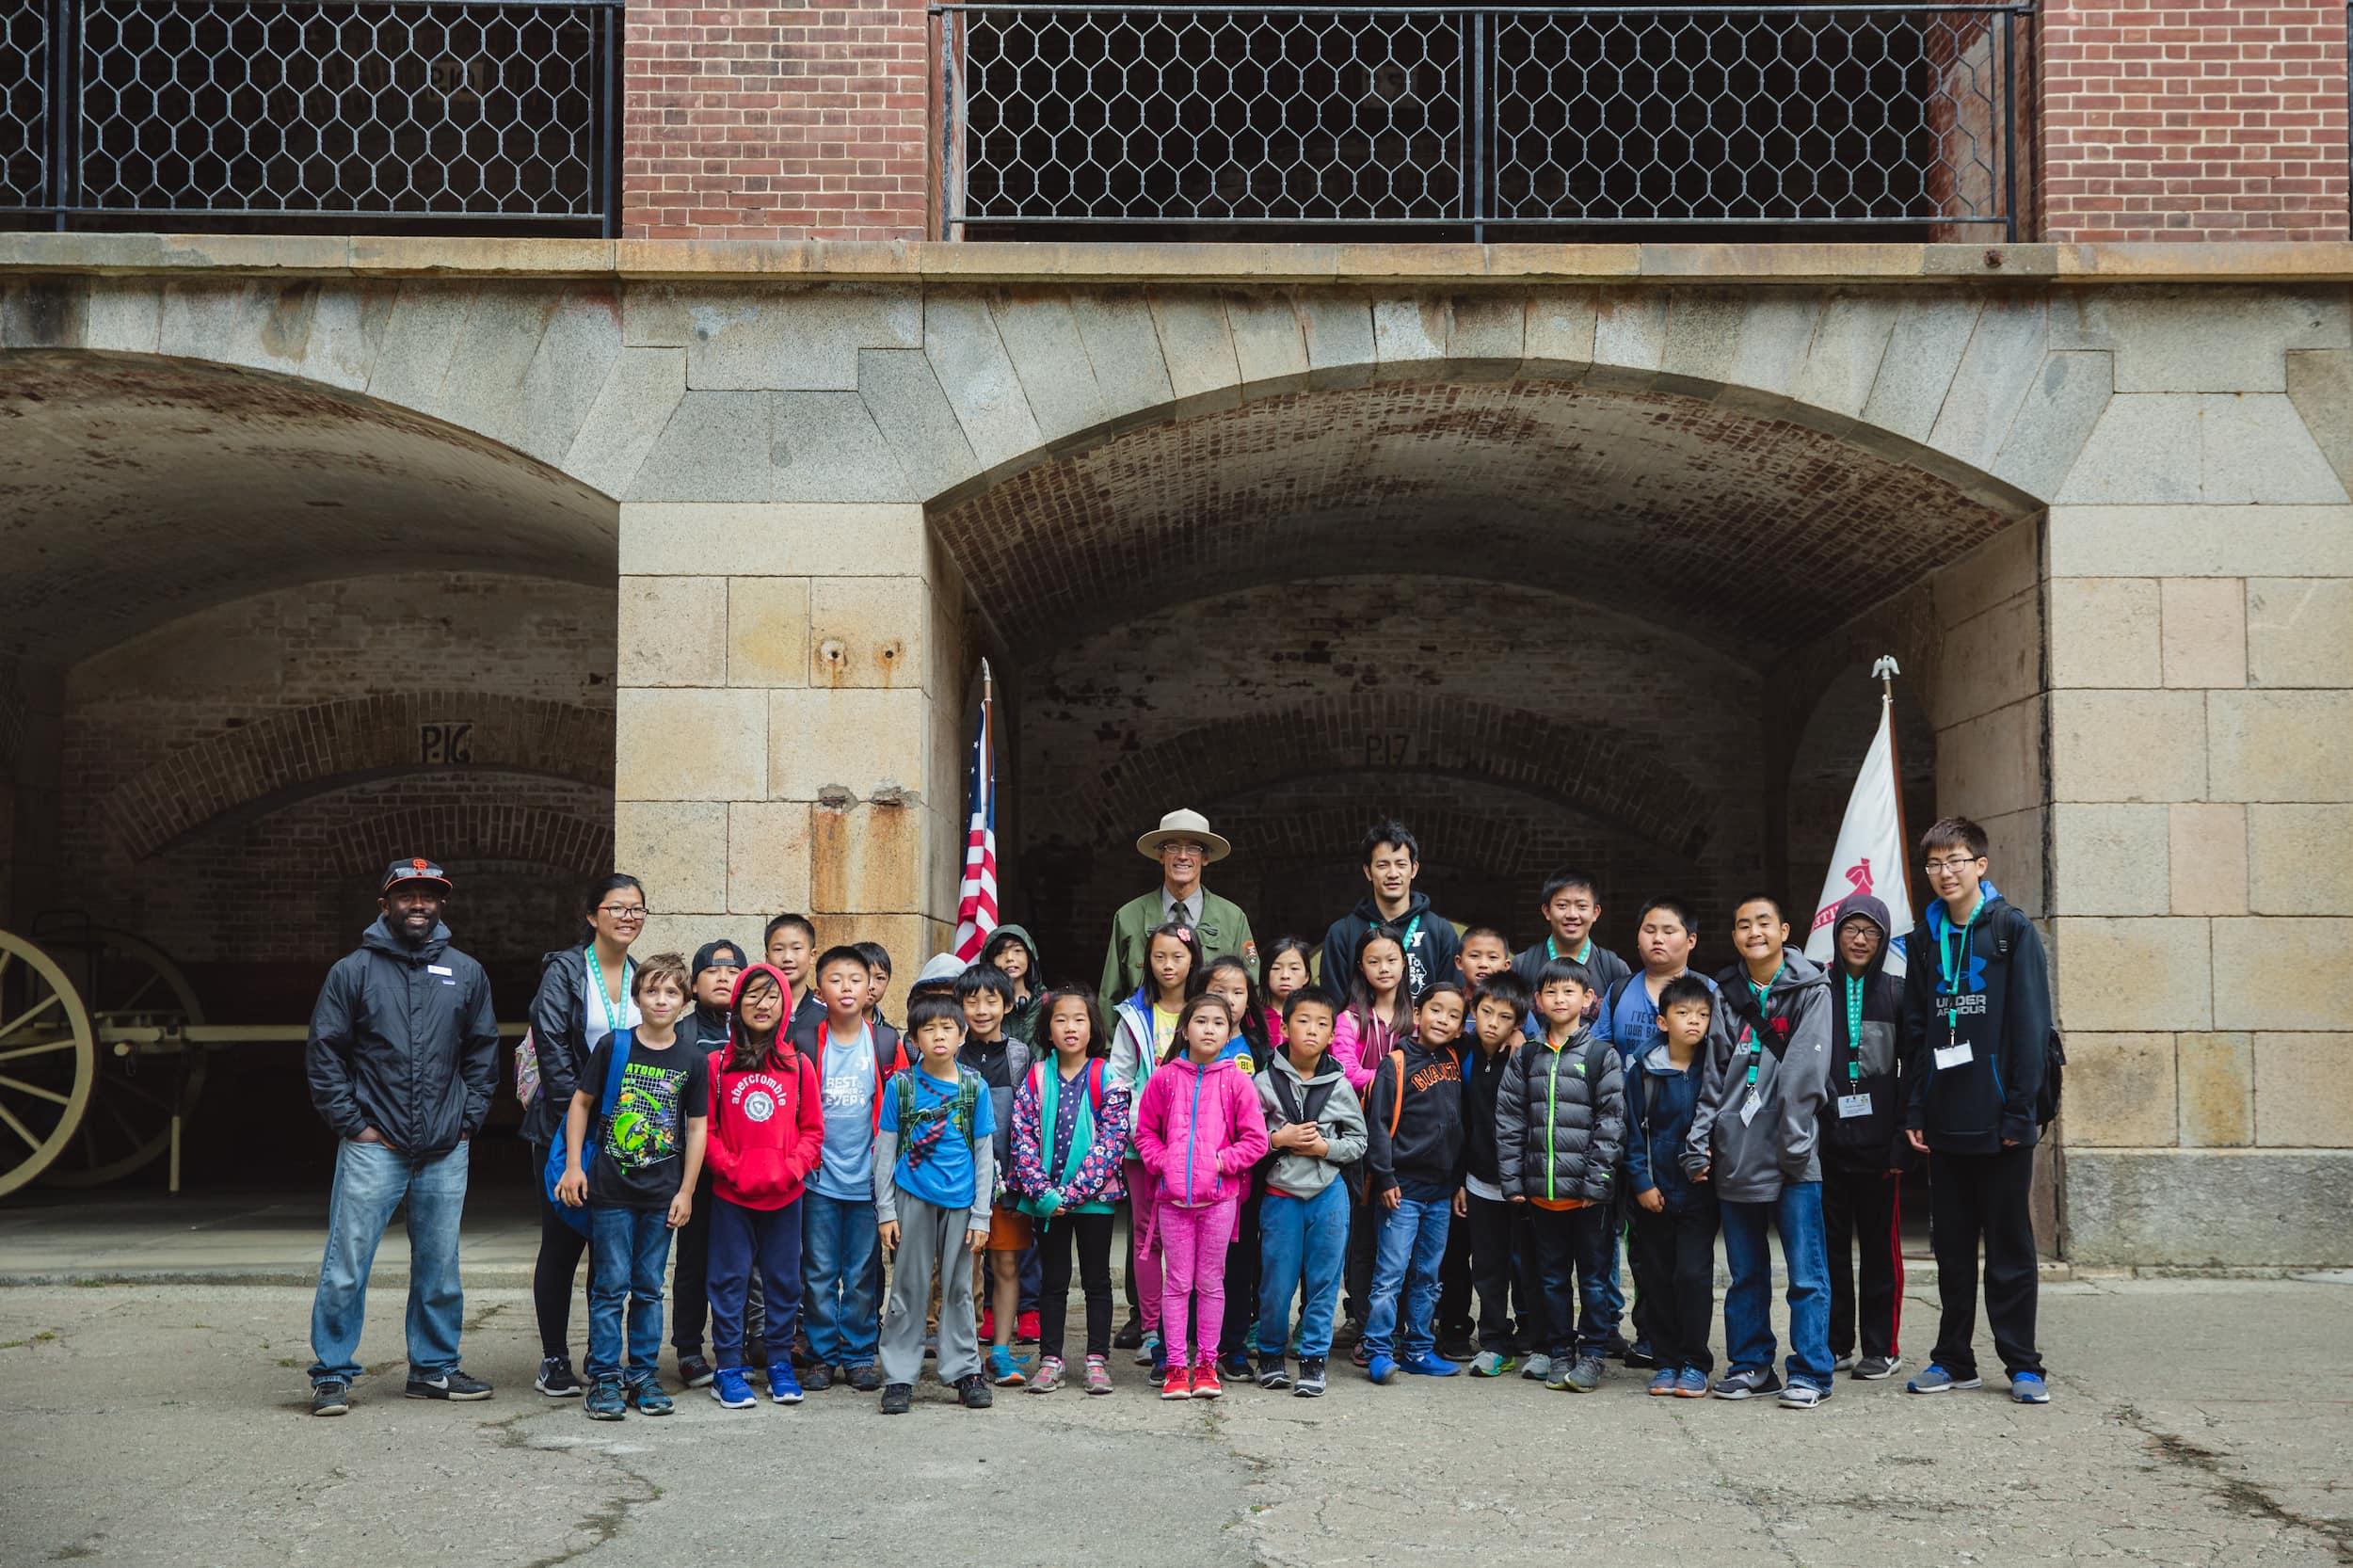 Park Ranger with a large group of kids at Fort Point. Photo by Erin Conger.